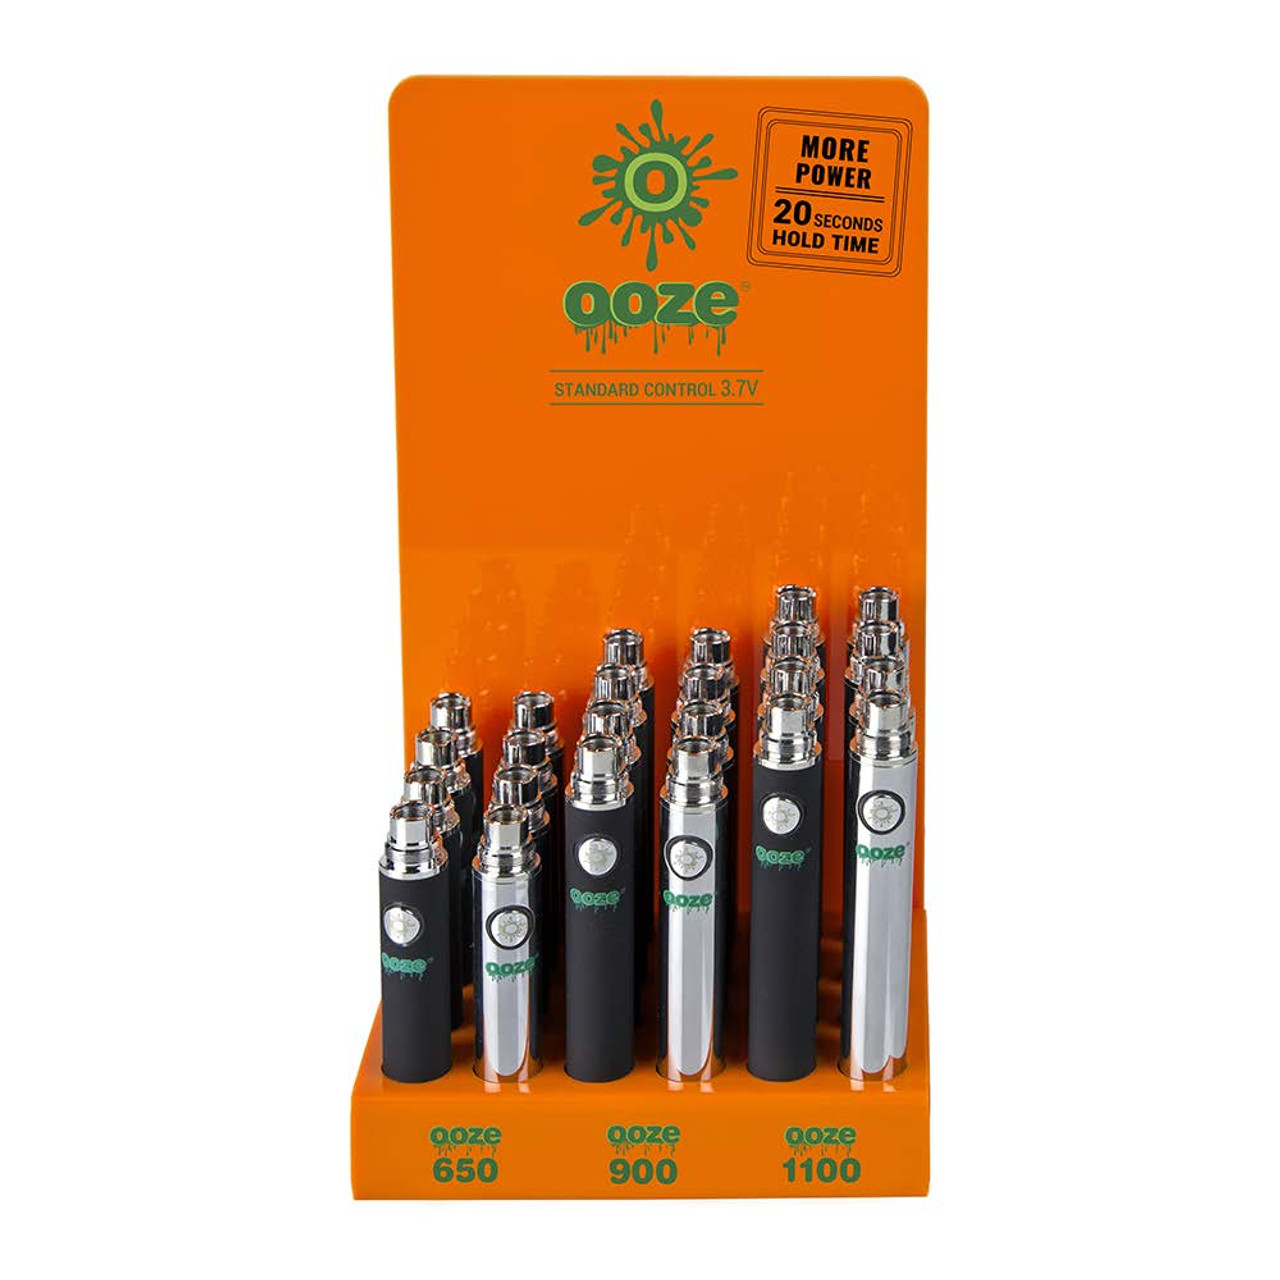 Ooze Battery Display - 24 ct.